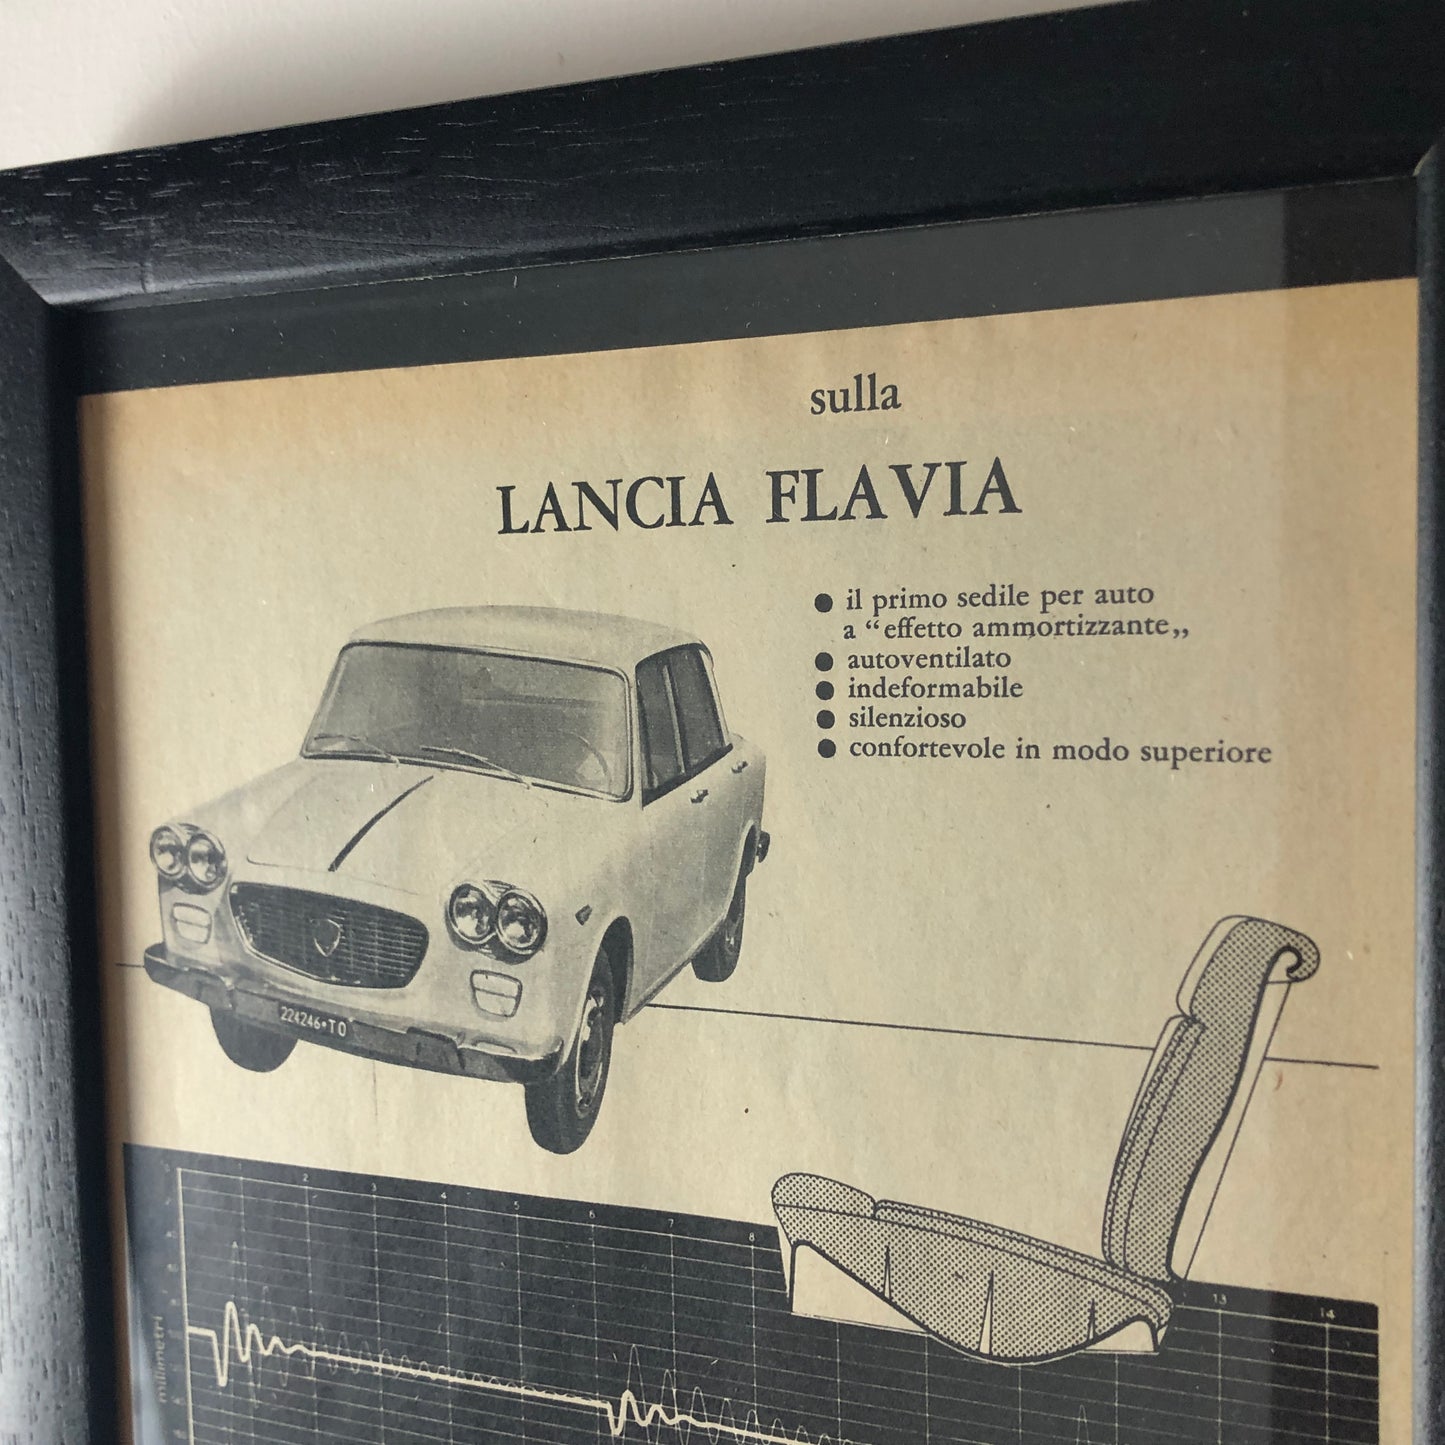 Pirelli and Lancia, Advertising Year 1960 the Lancia Flavia is Equipped with the First Pirelli "Shock-absorbing Effect" Seat